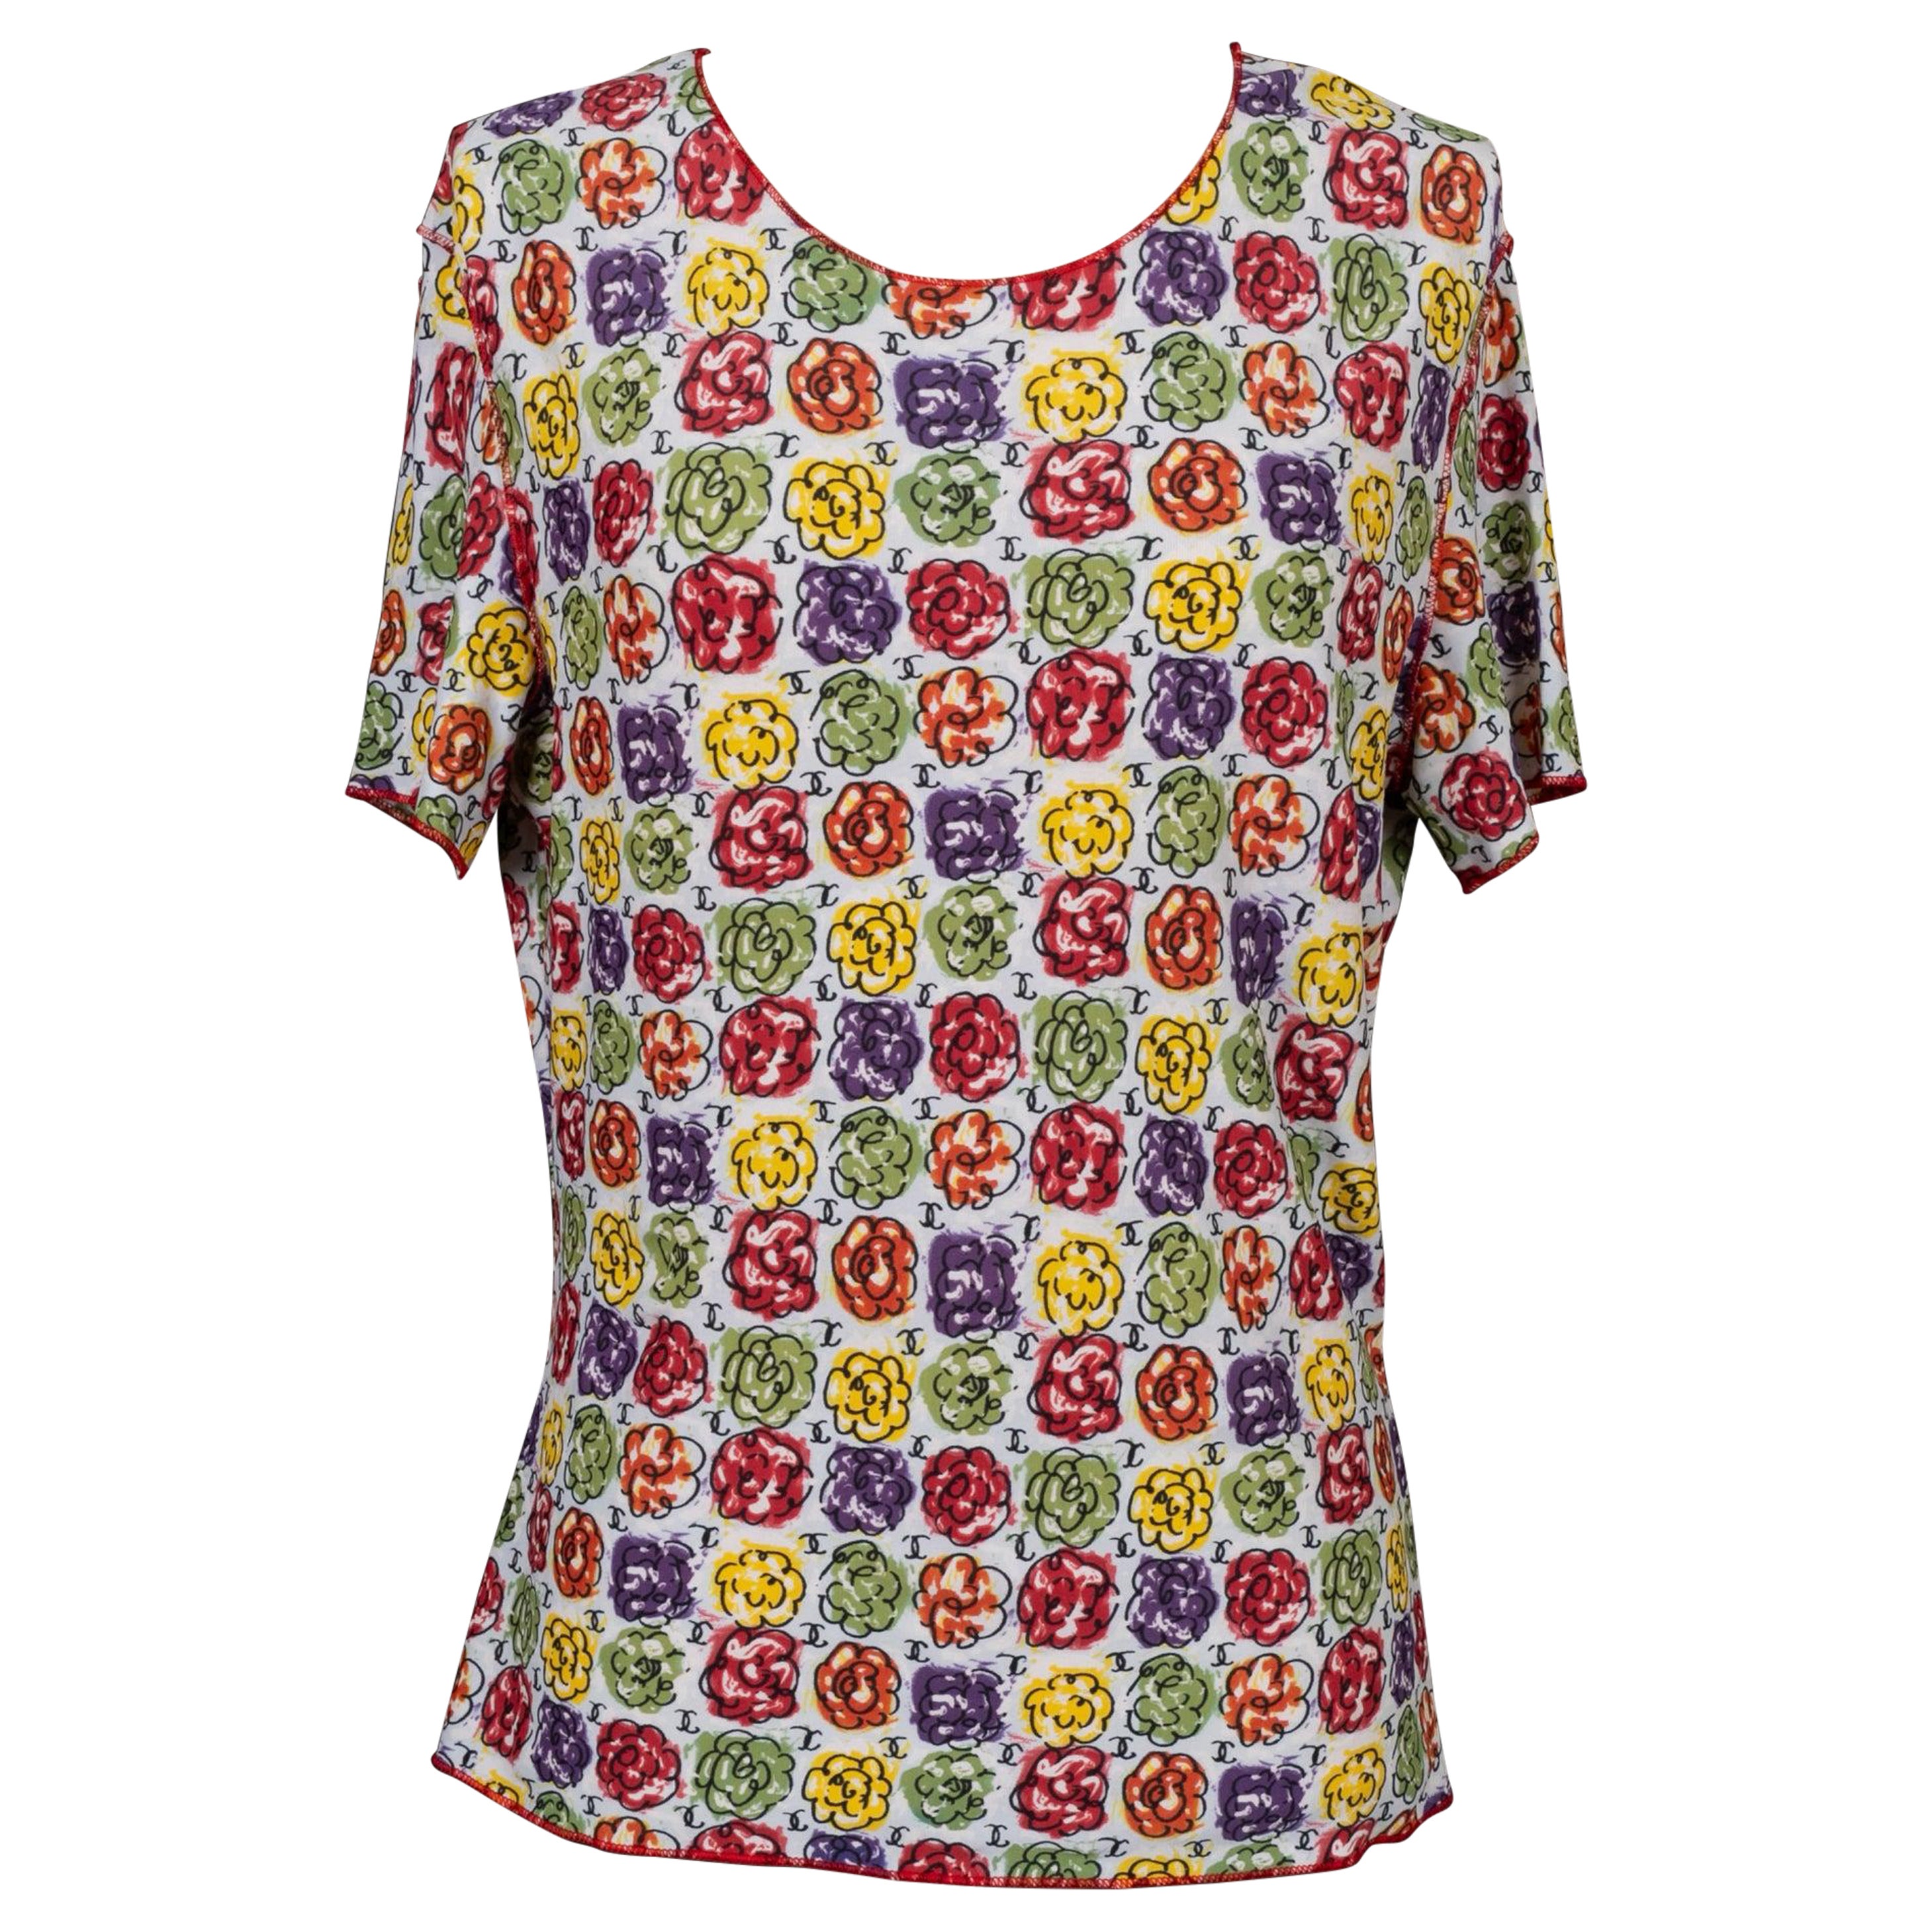 Chanel Floral Pattern Spring Top, 2000 For Sale